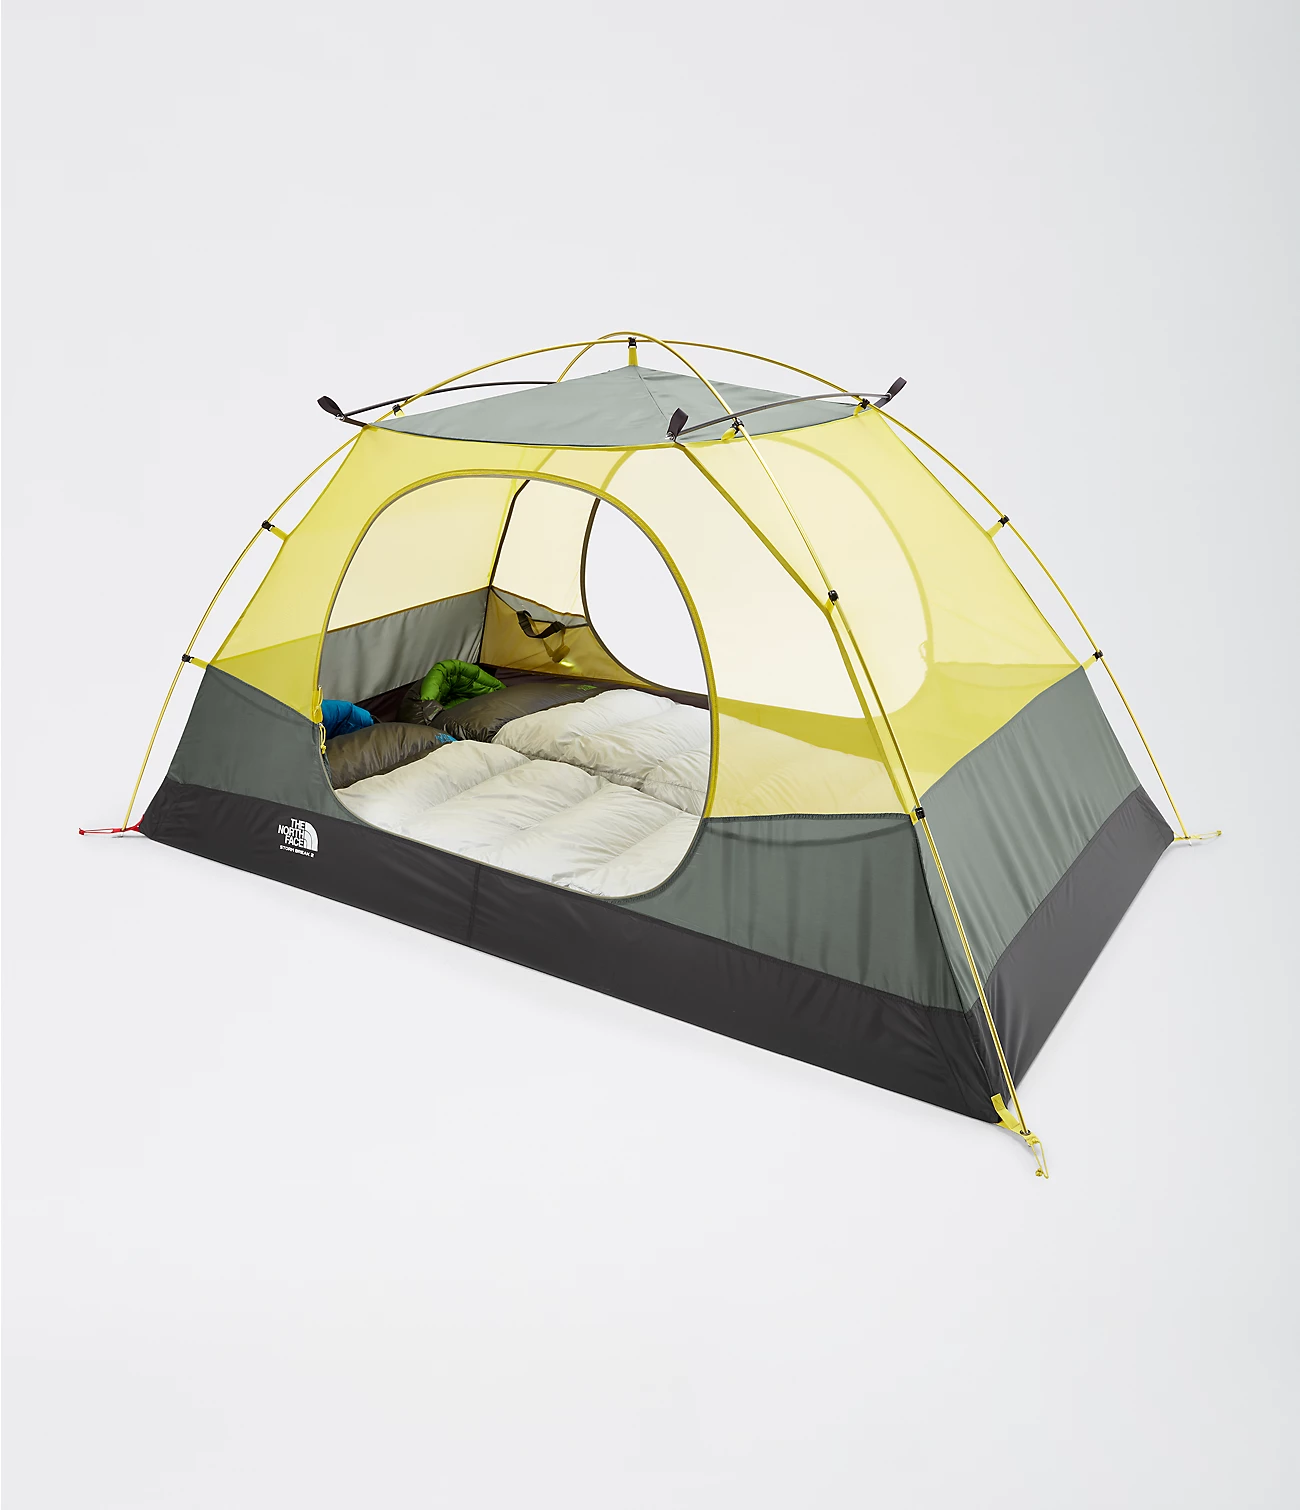 Stormbreak 2 - The Benchmark Outdoor Outfitters